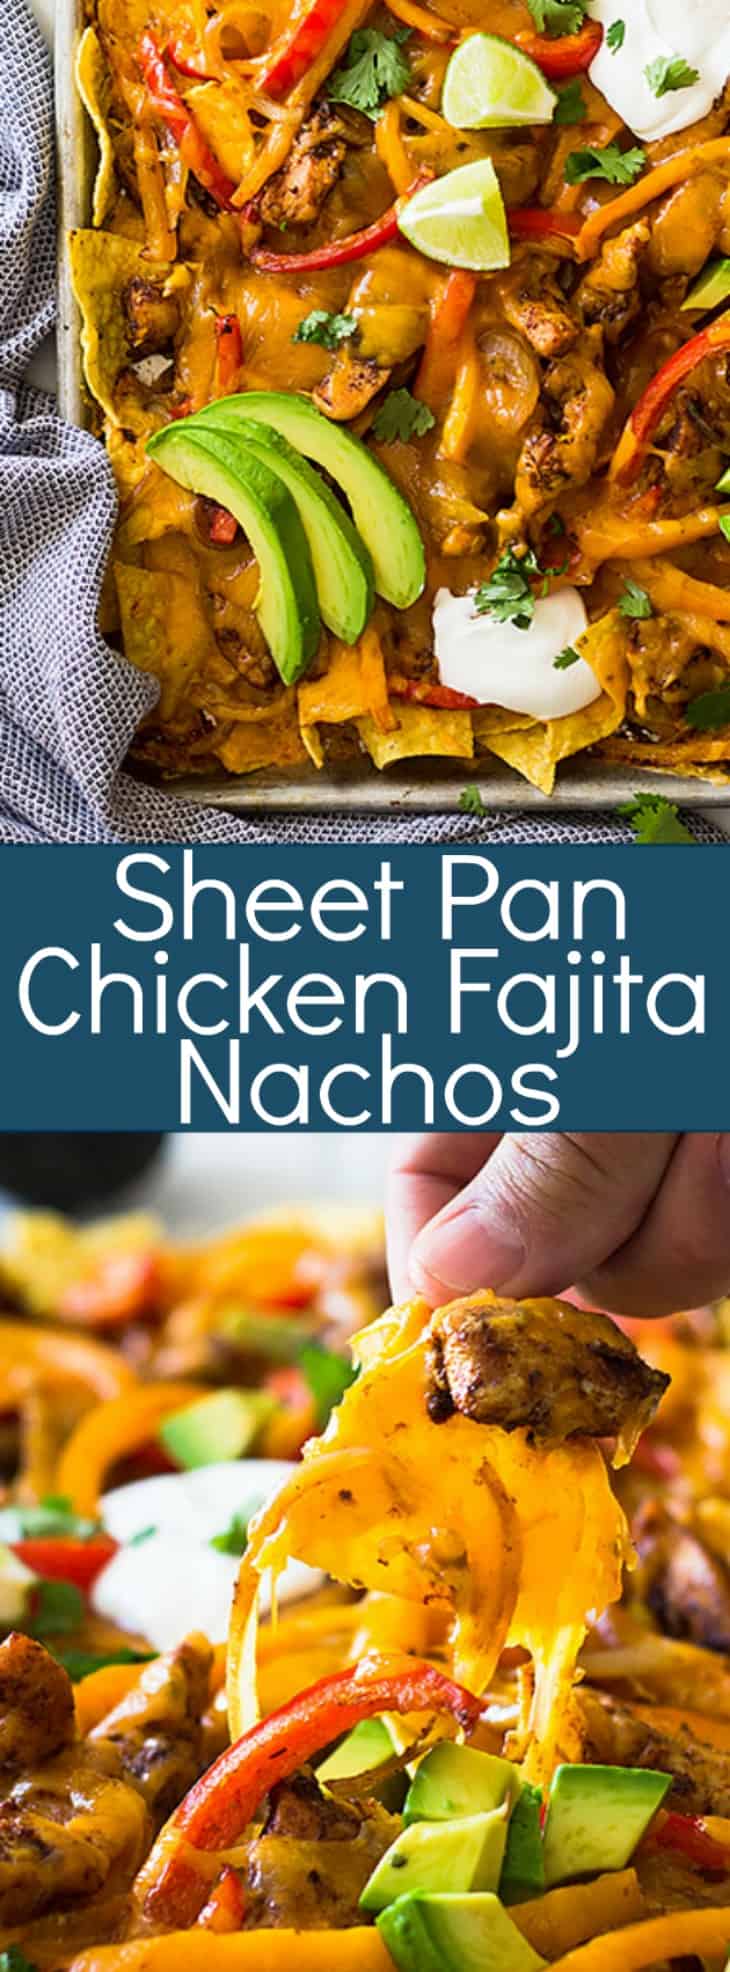 This Sheet Pan Chicken Fajita Nachos is a great game day appetizer for a crowd! Filled with seasoned chicken and vegetables and lots of cheese! | www.countrysidecravings.com